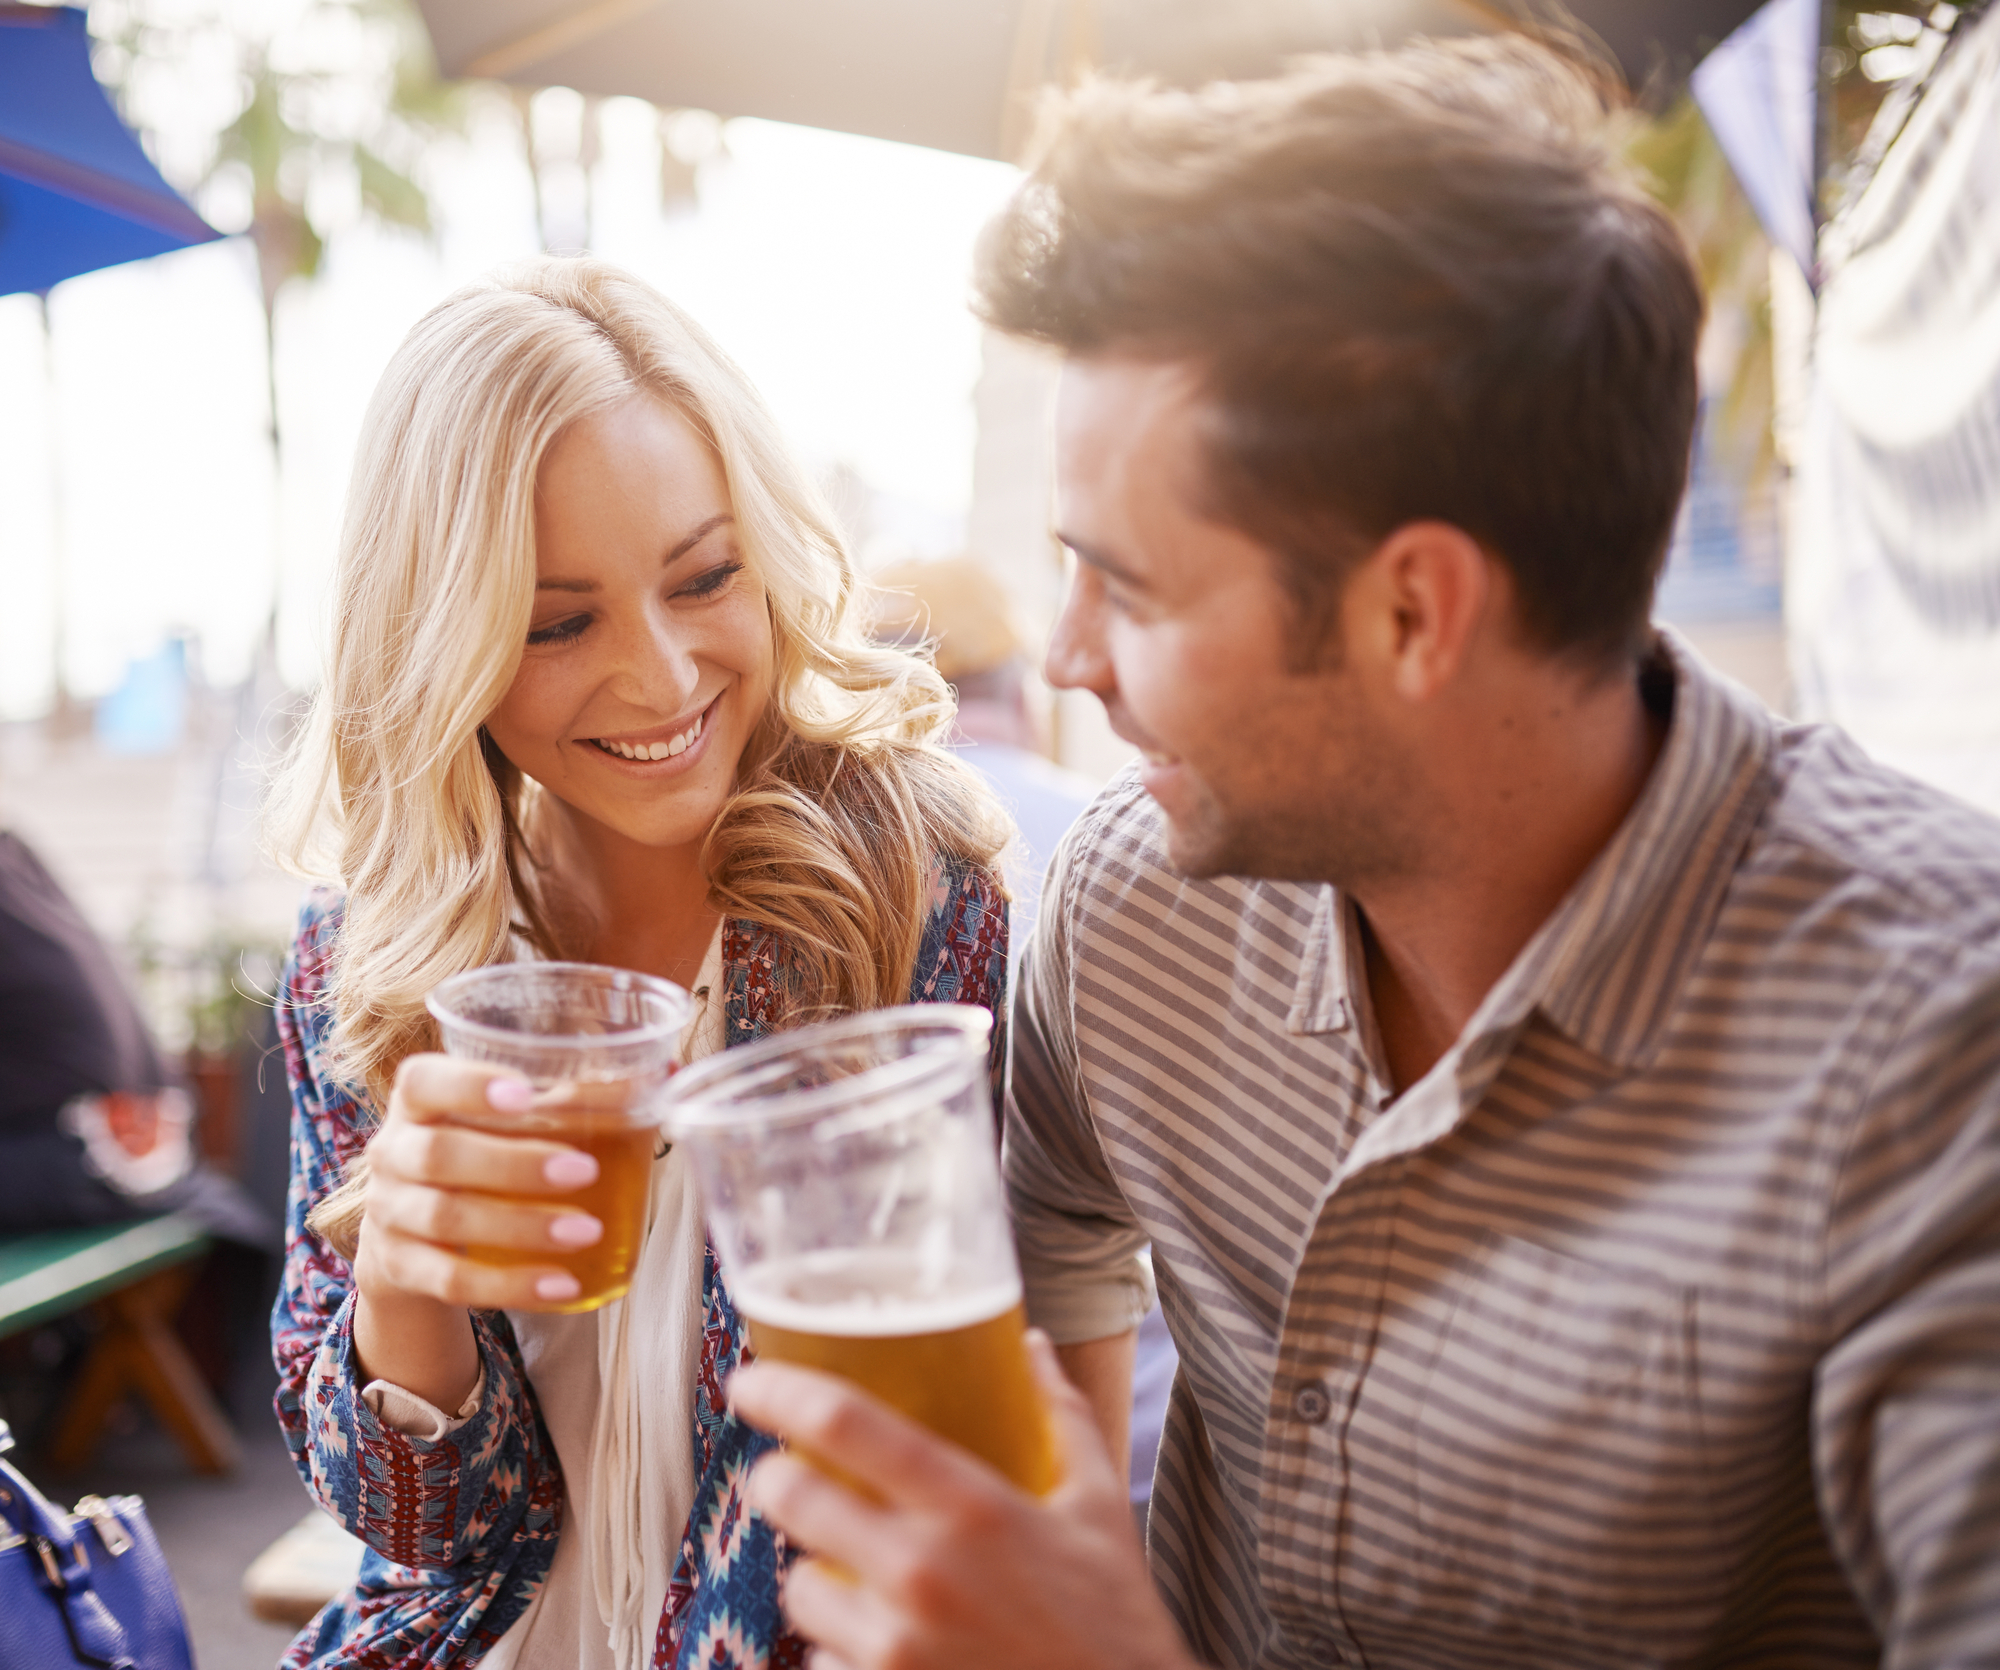 Man and Woman Drinking Beers